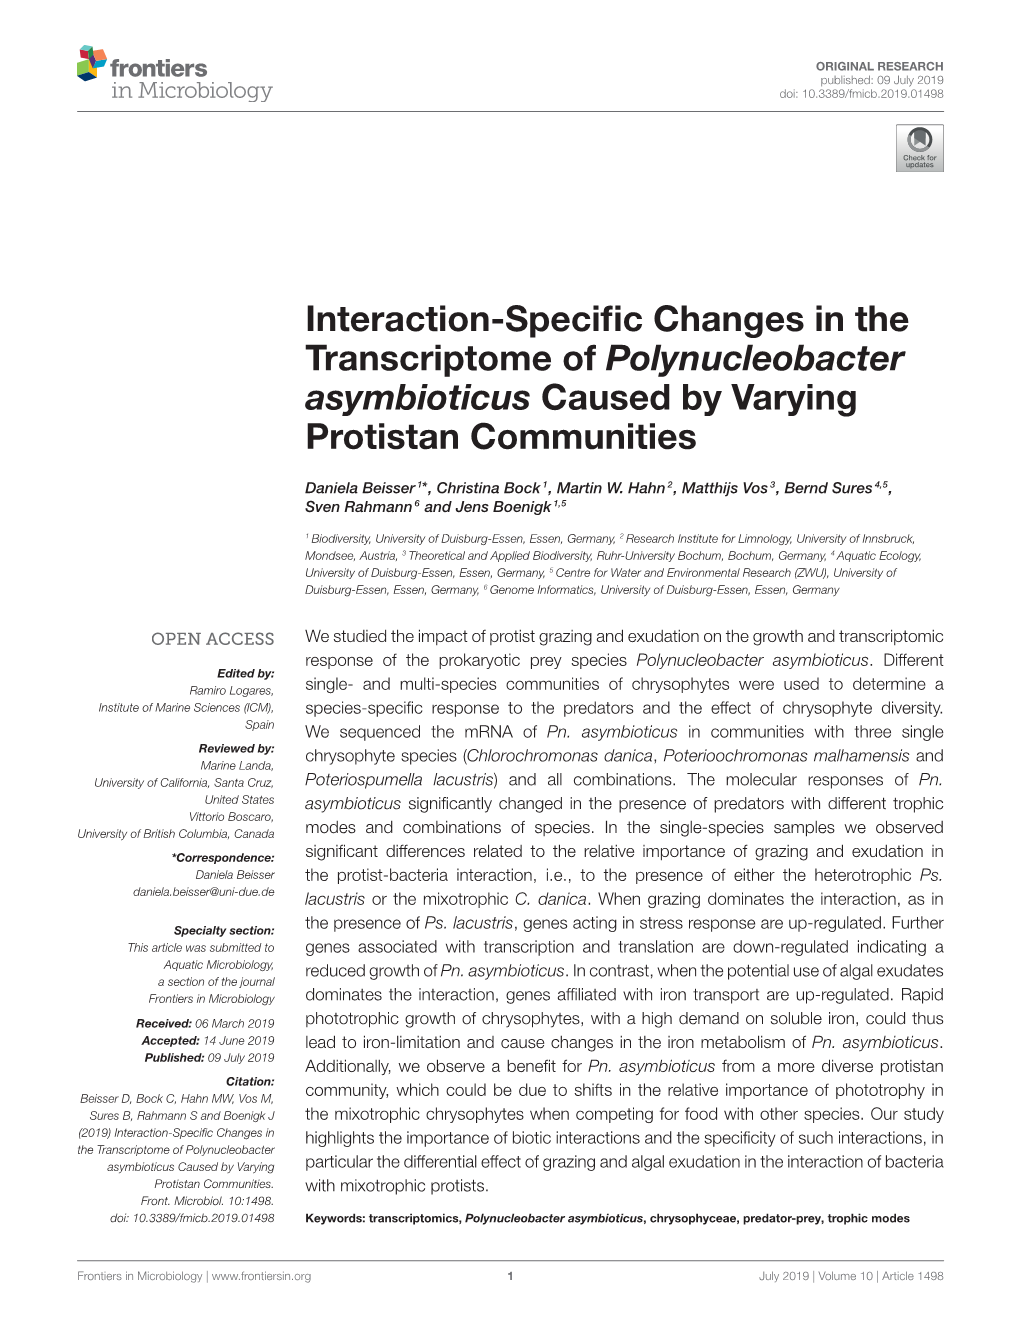 Interaction-Specific Changes in the Transcriptome of Polynucleobacter